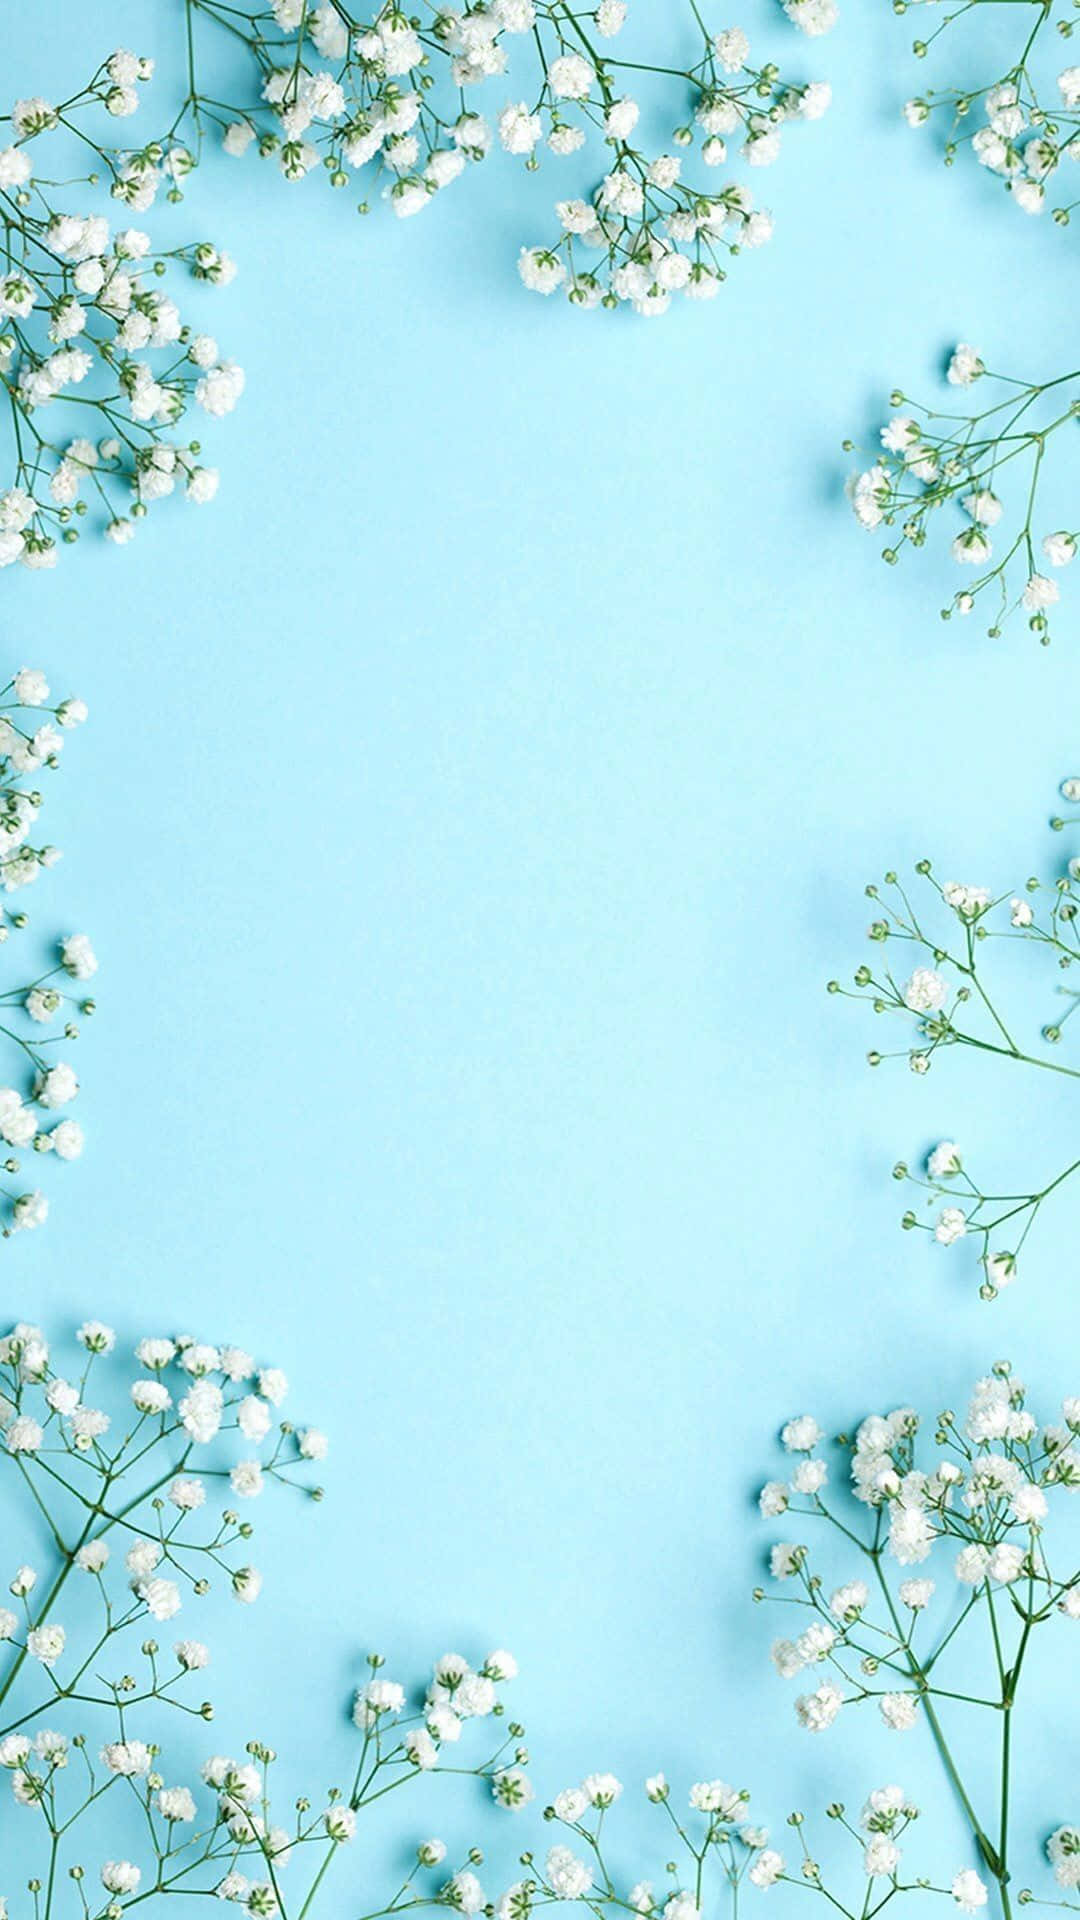 A Frame Of Baby's Breath Flowers On A Blue Background